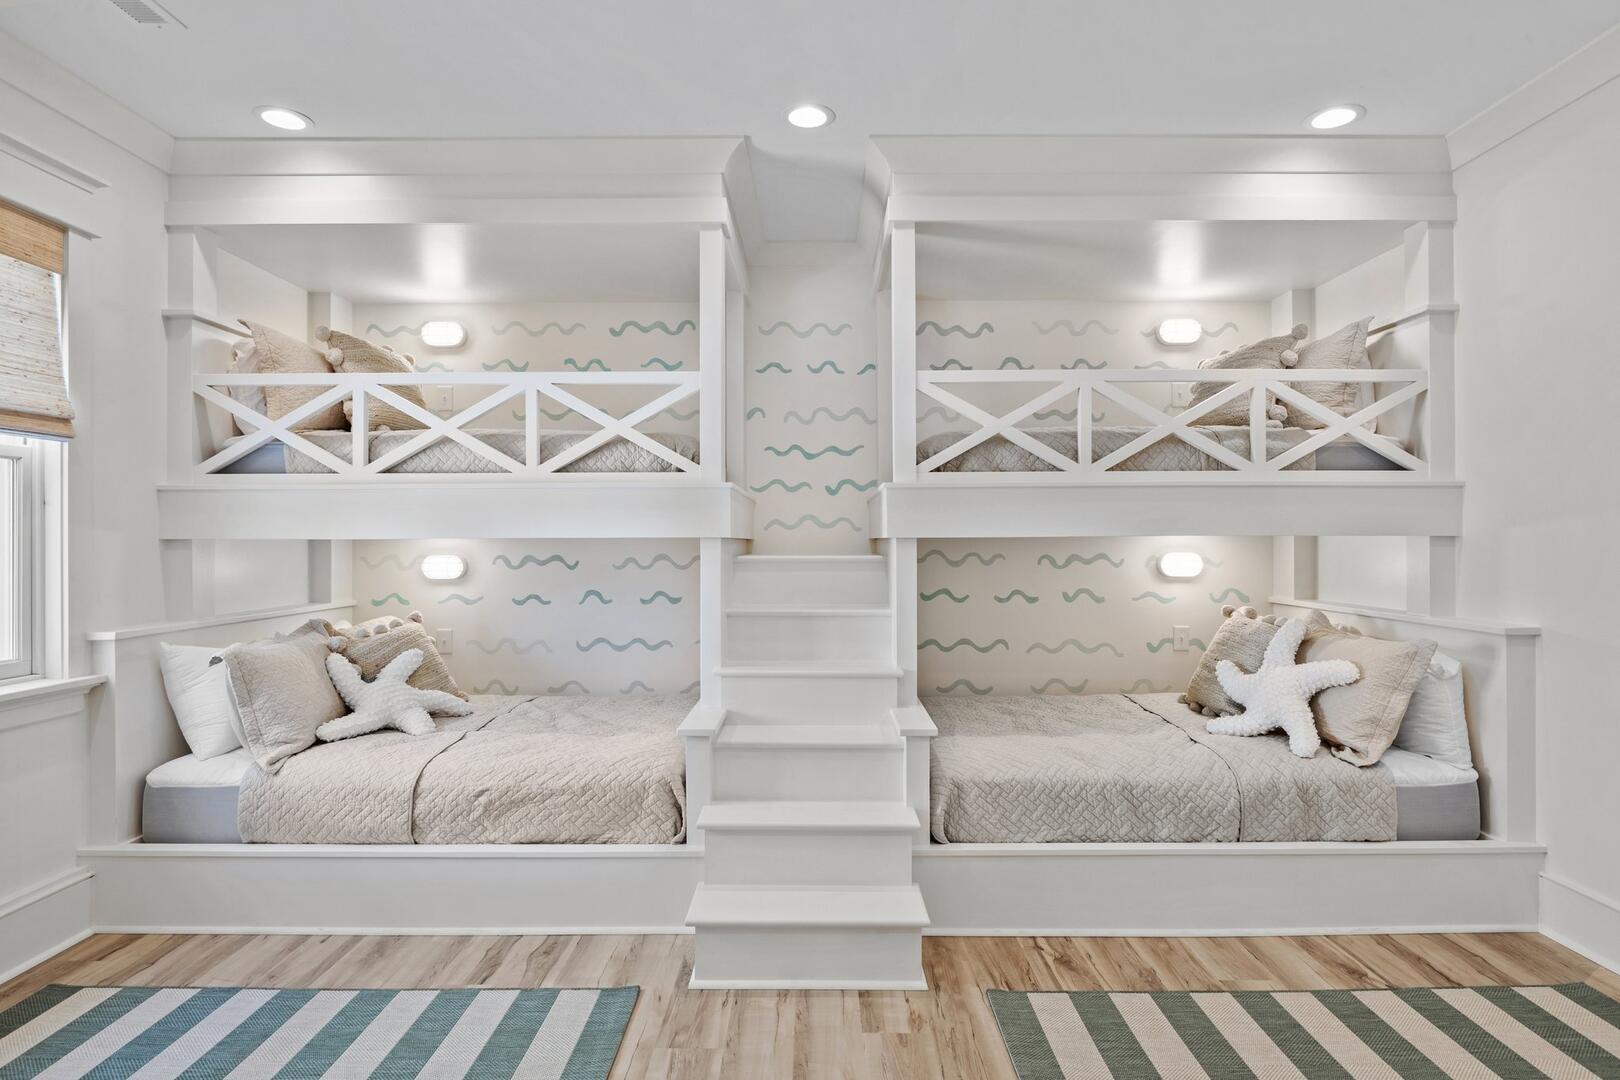 Bunk Room with Built-in Beds